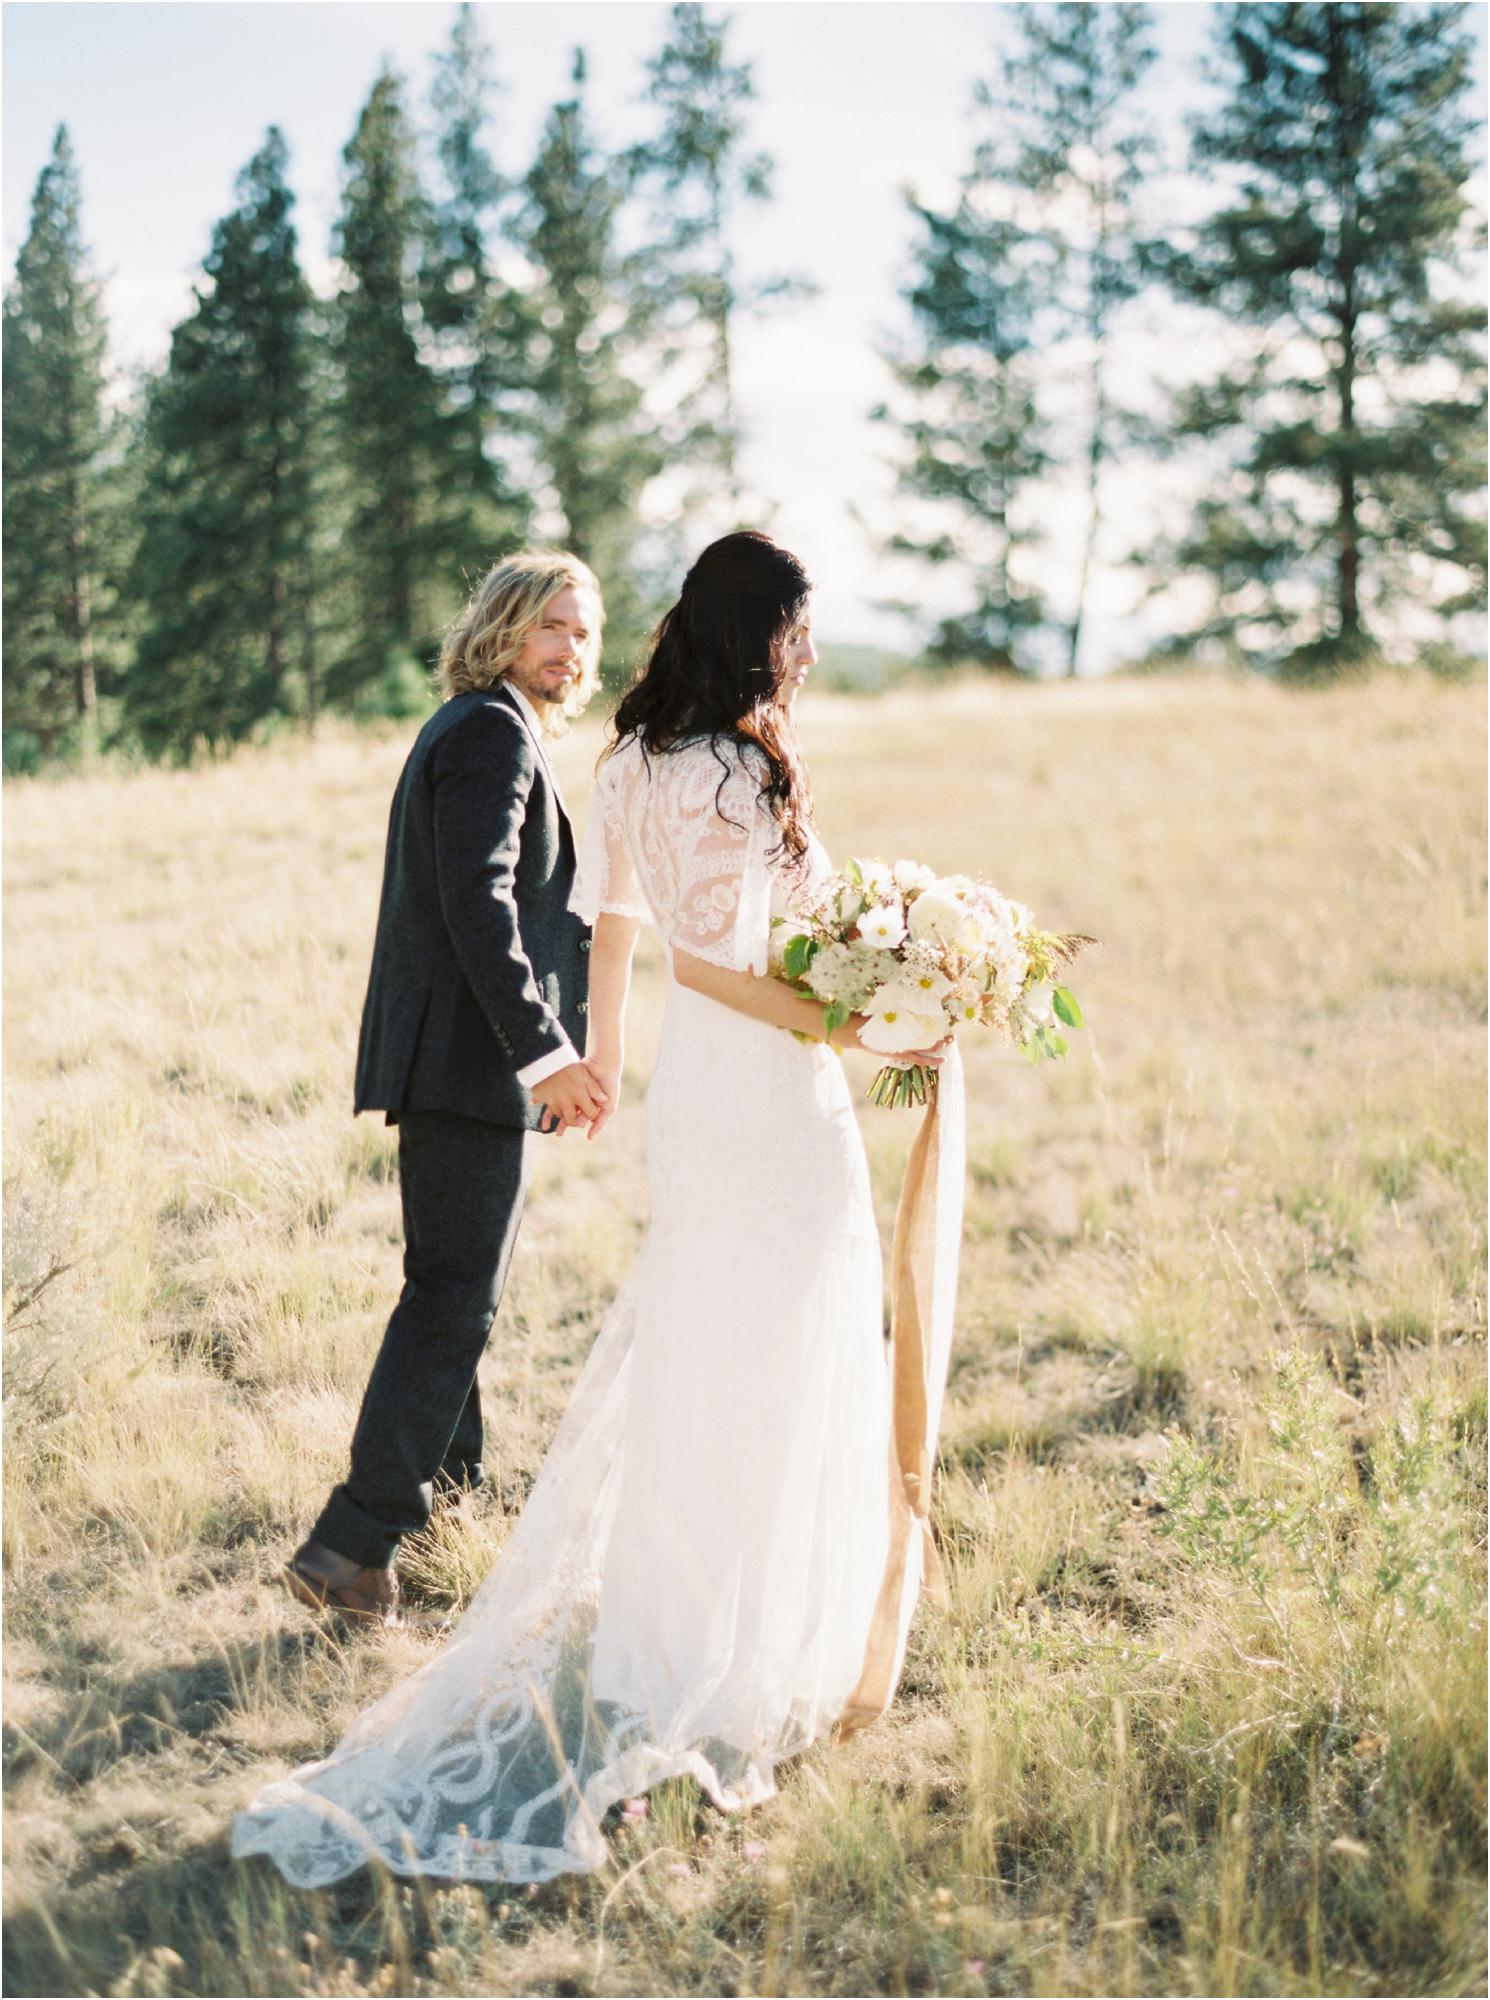 Montana Wedding at the Resort at Paws Up  Design and Florals by Greenwood Events http://www.greenwood.events/   ©Jeremiah & Rachel Photography